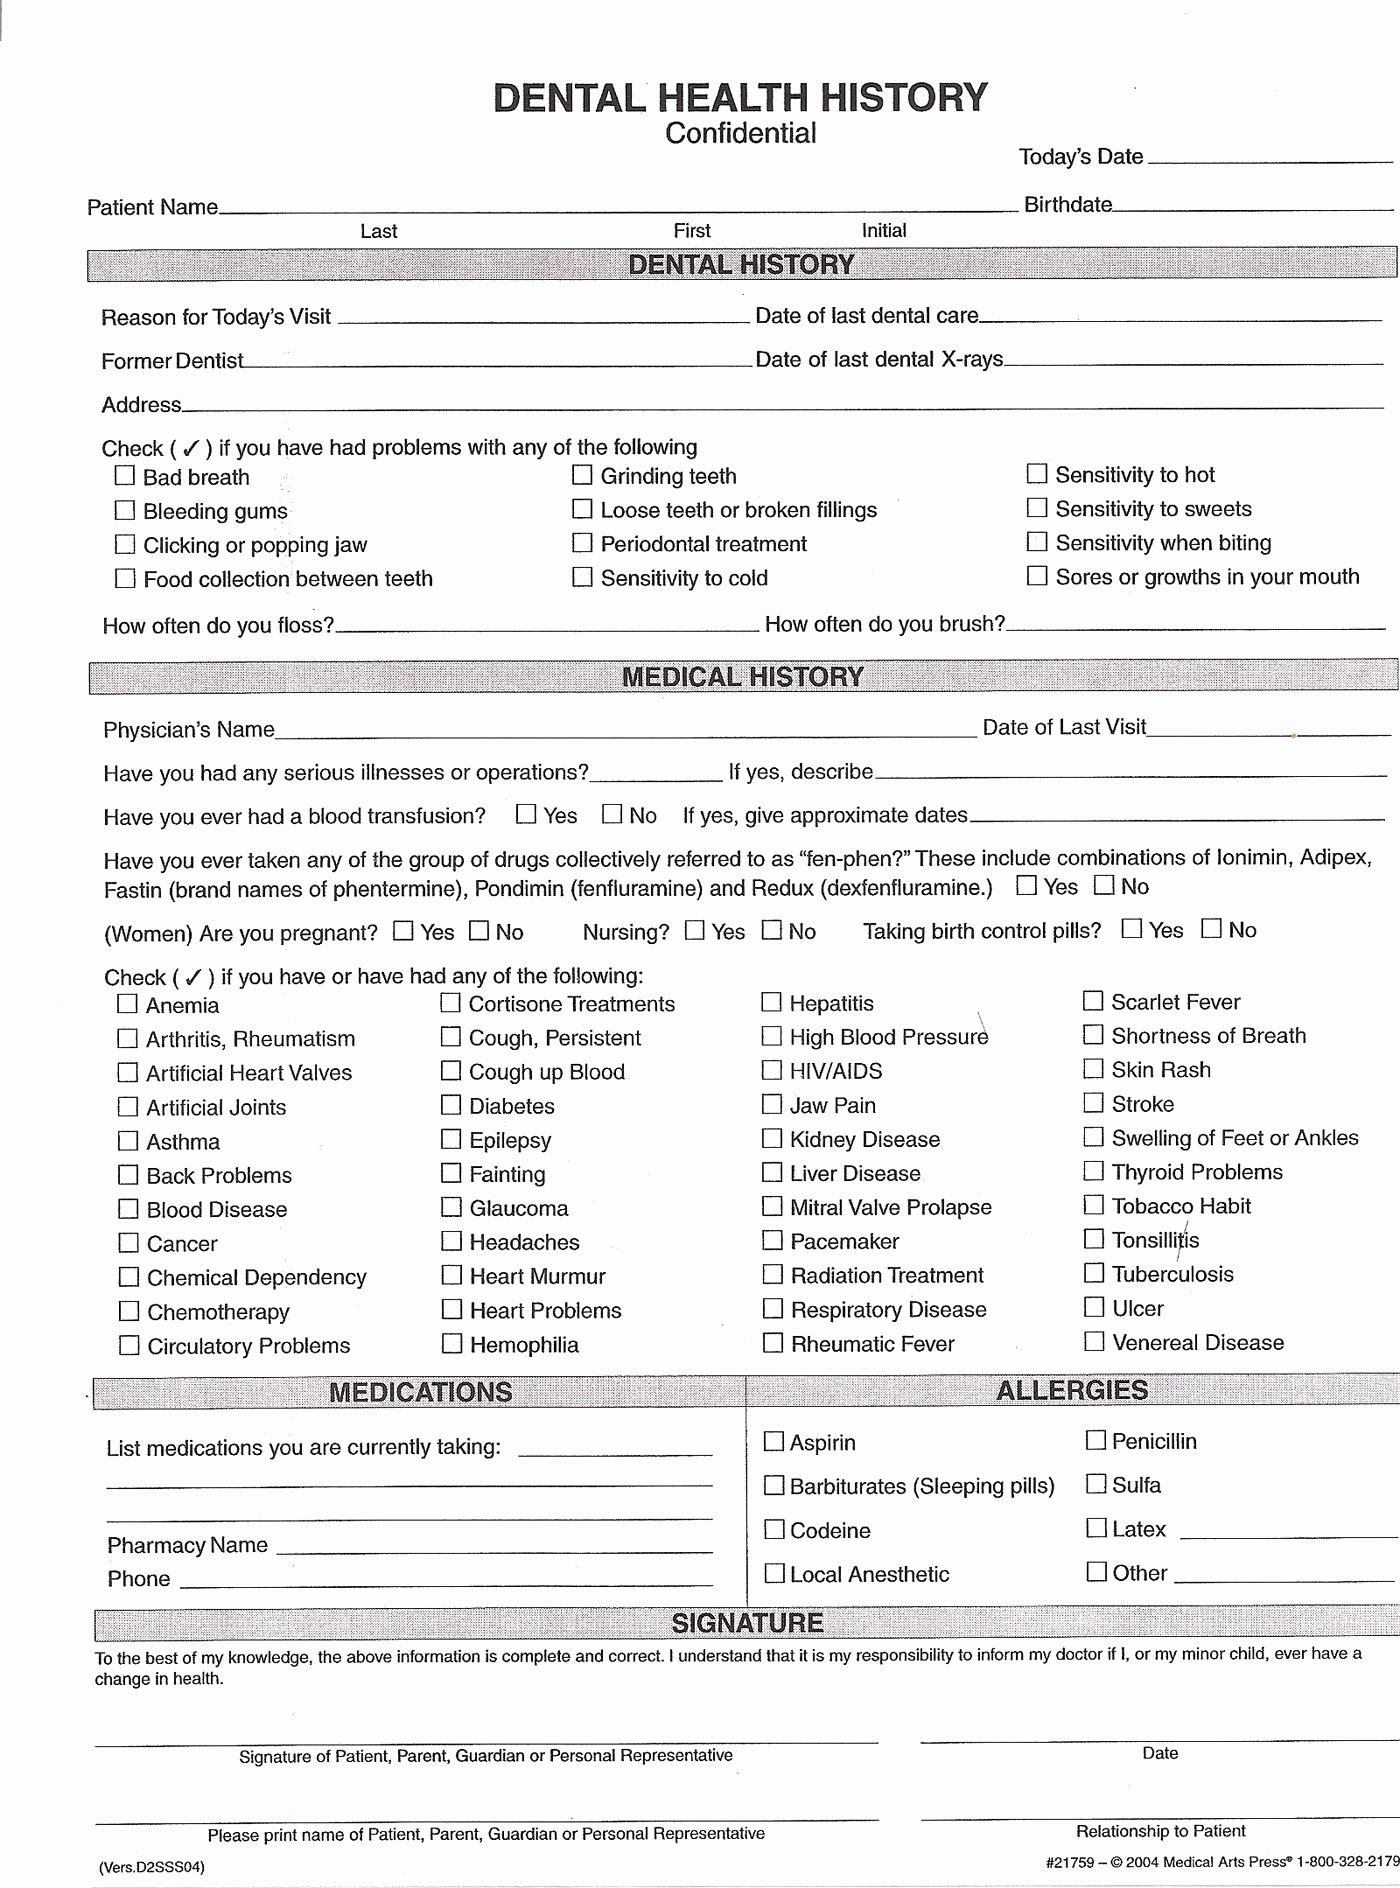 Dental Medical History form Template Awesome Medical History forms